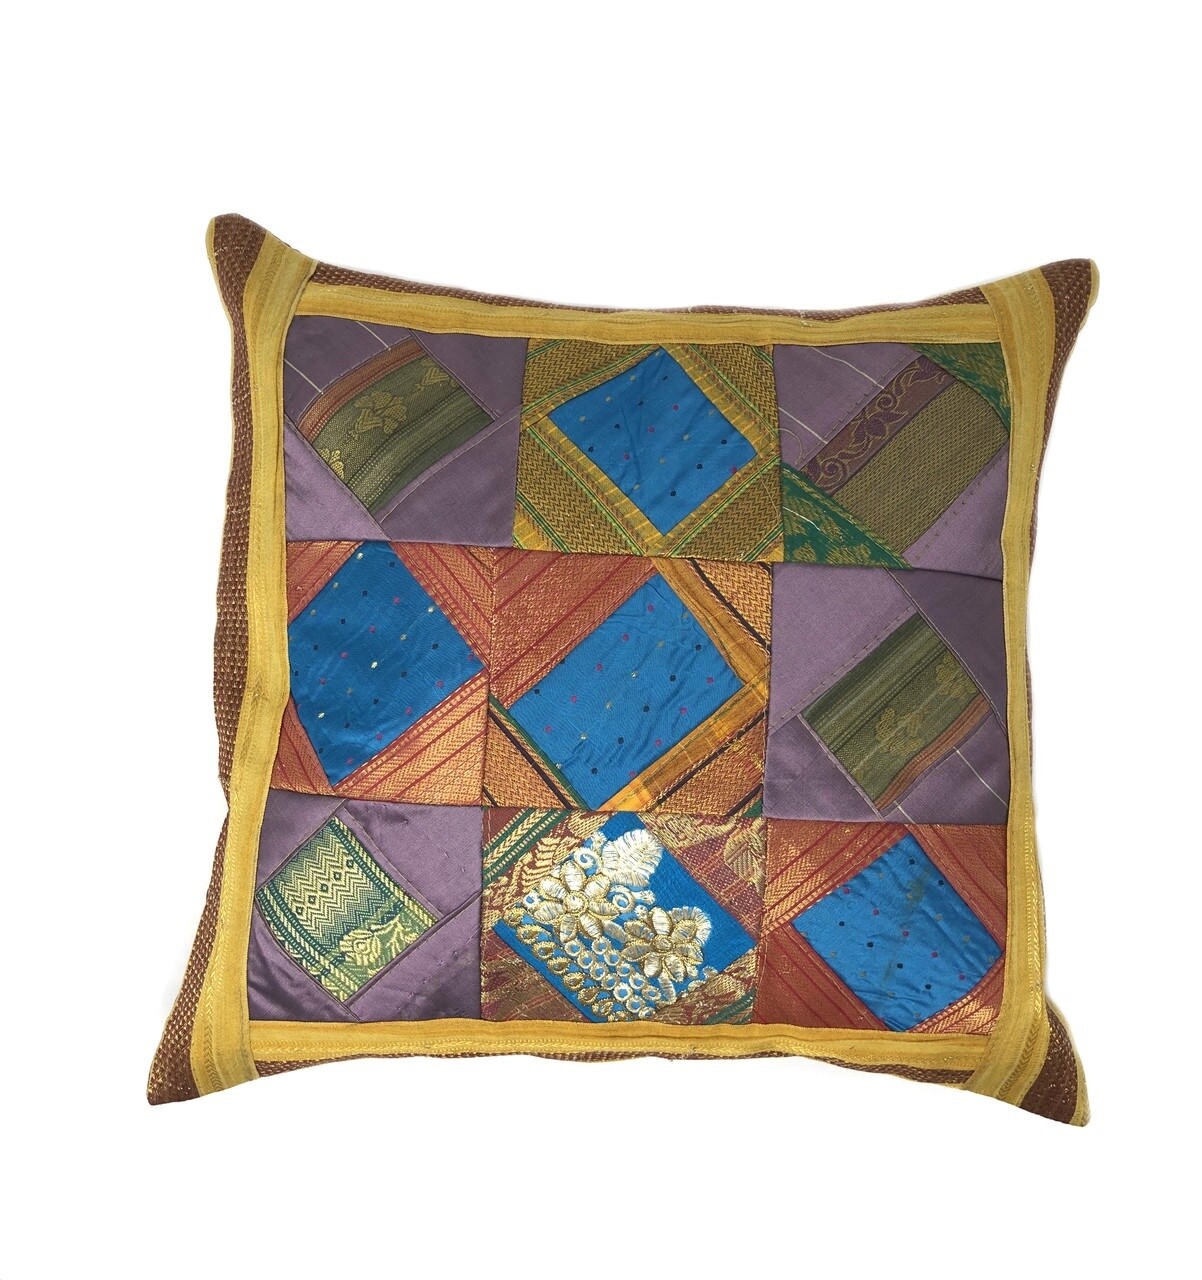 Indian Cushion Covers (Set of 3)